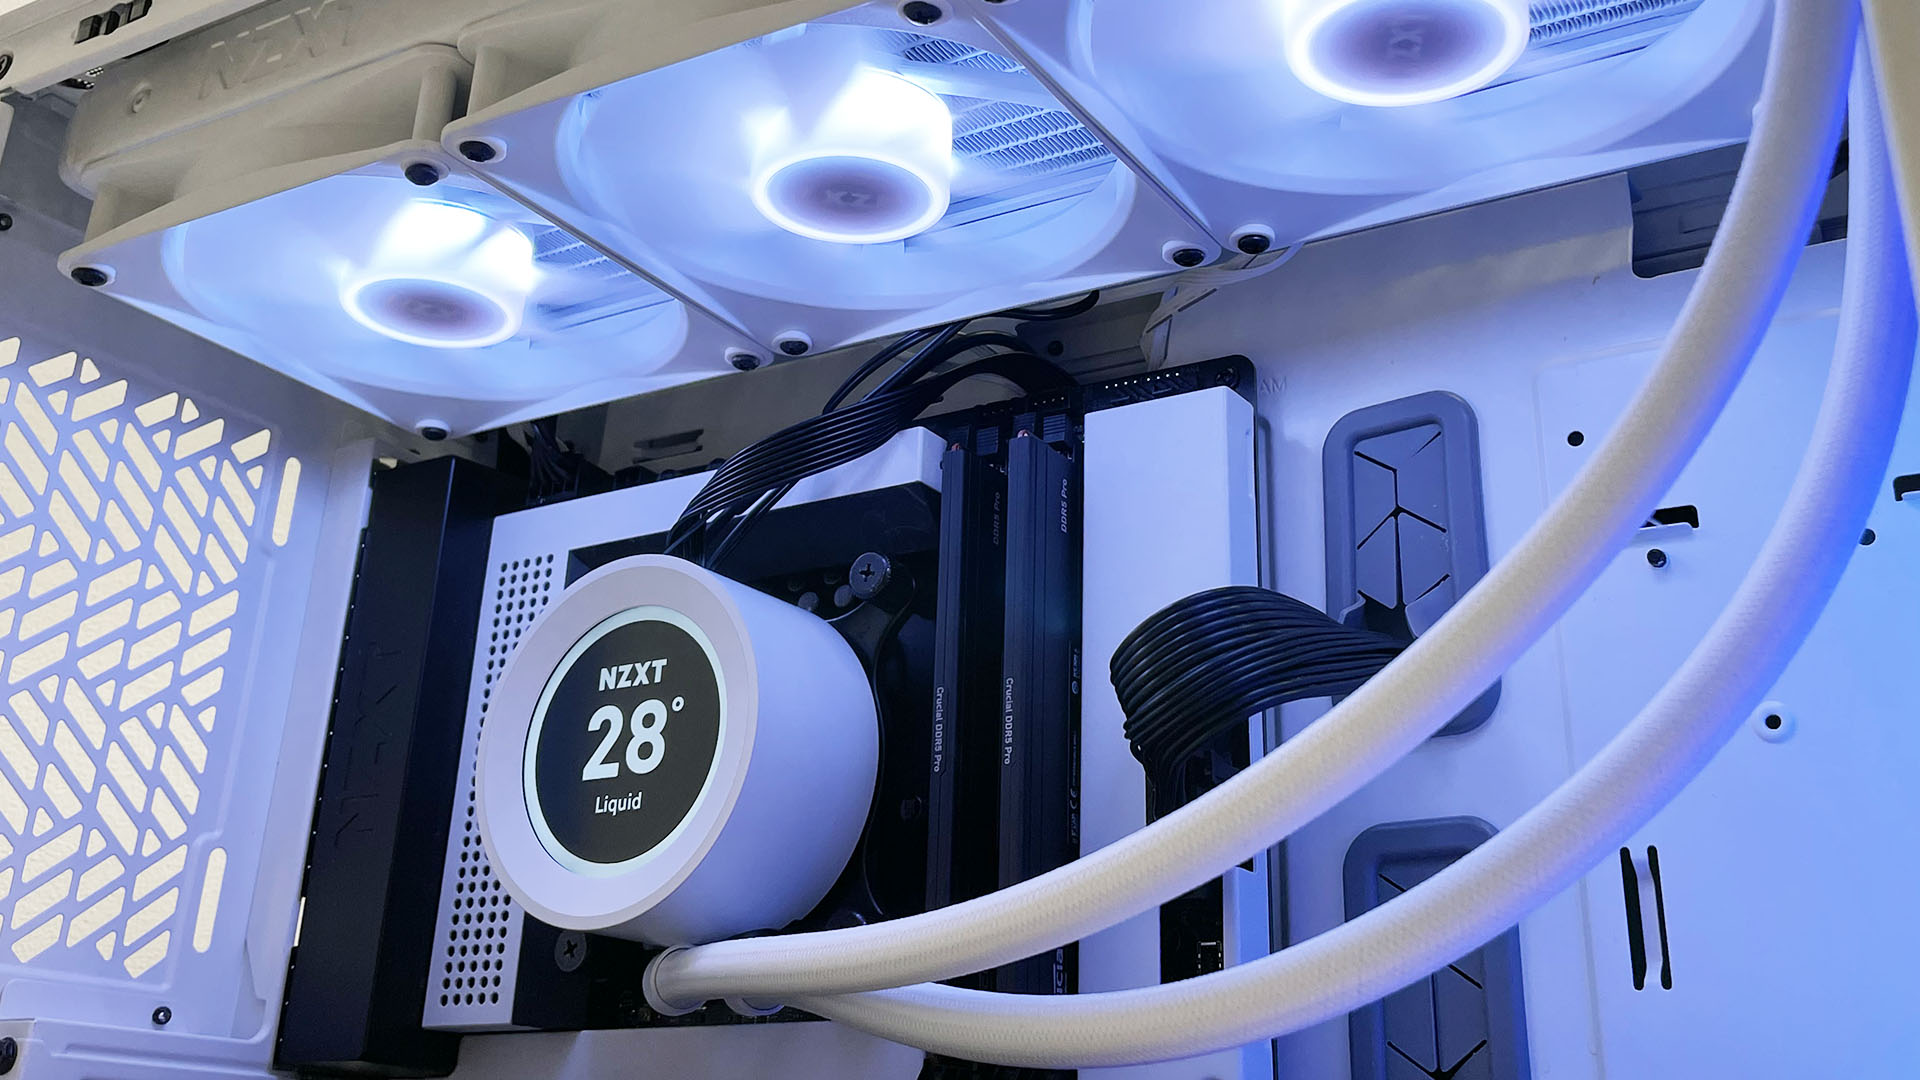 Best CPU Air Coolers We've Reviewed (2023): Thermals